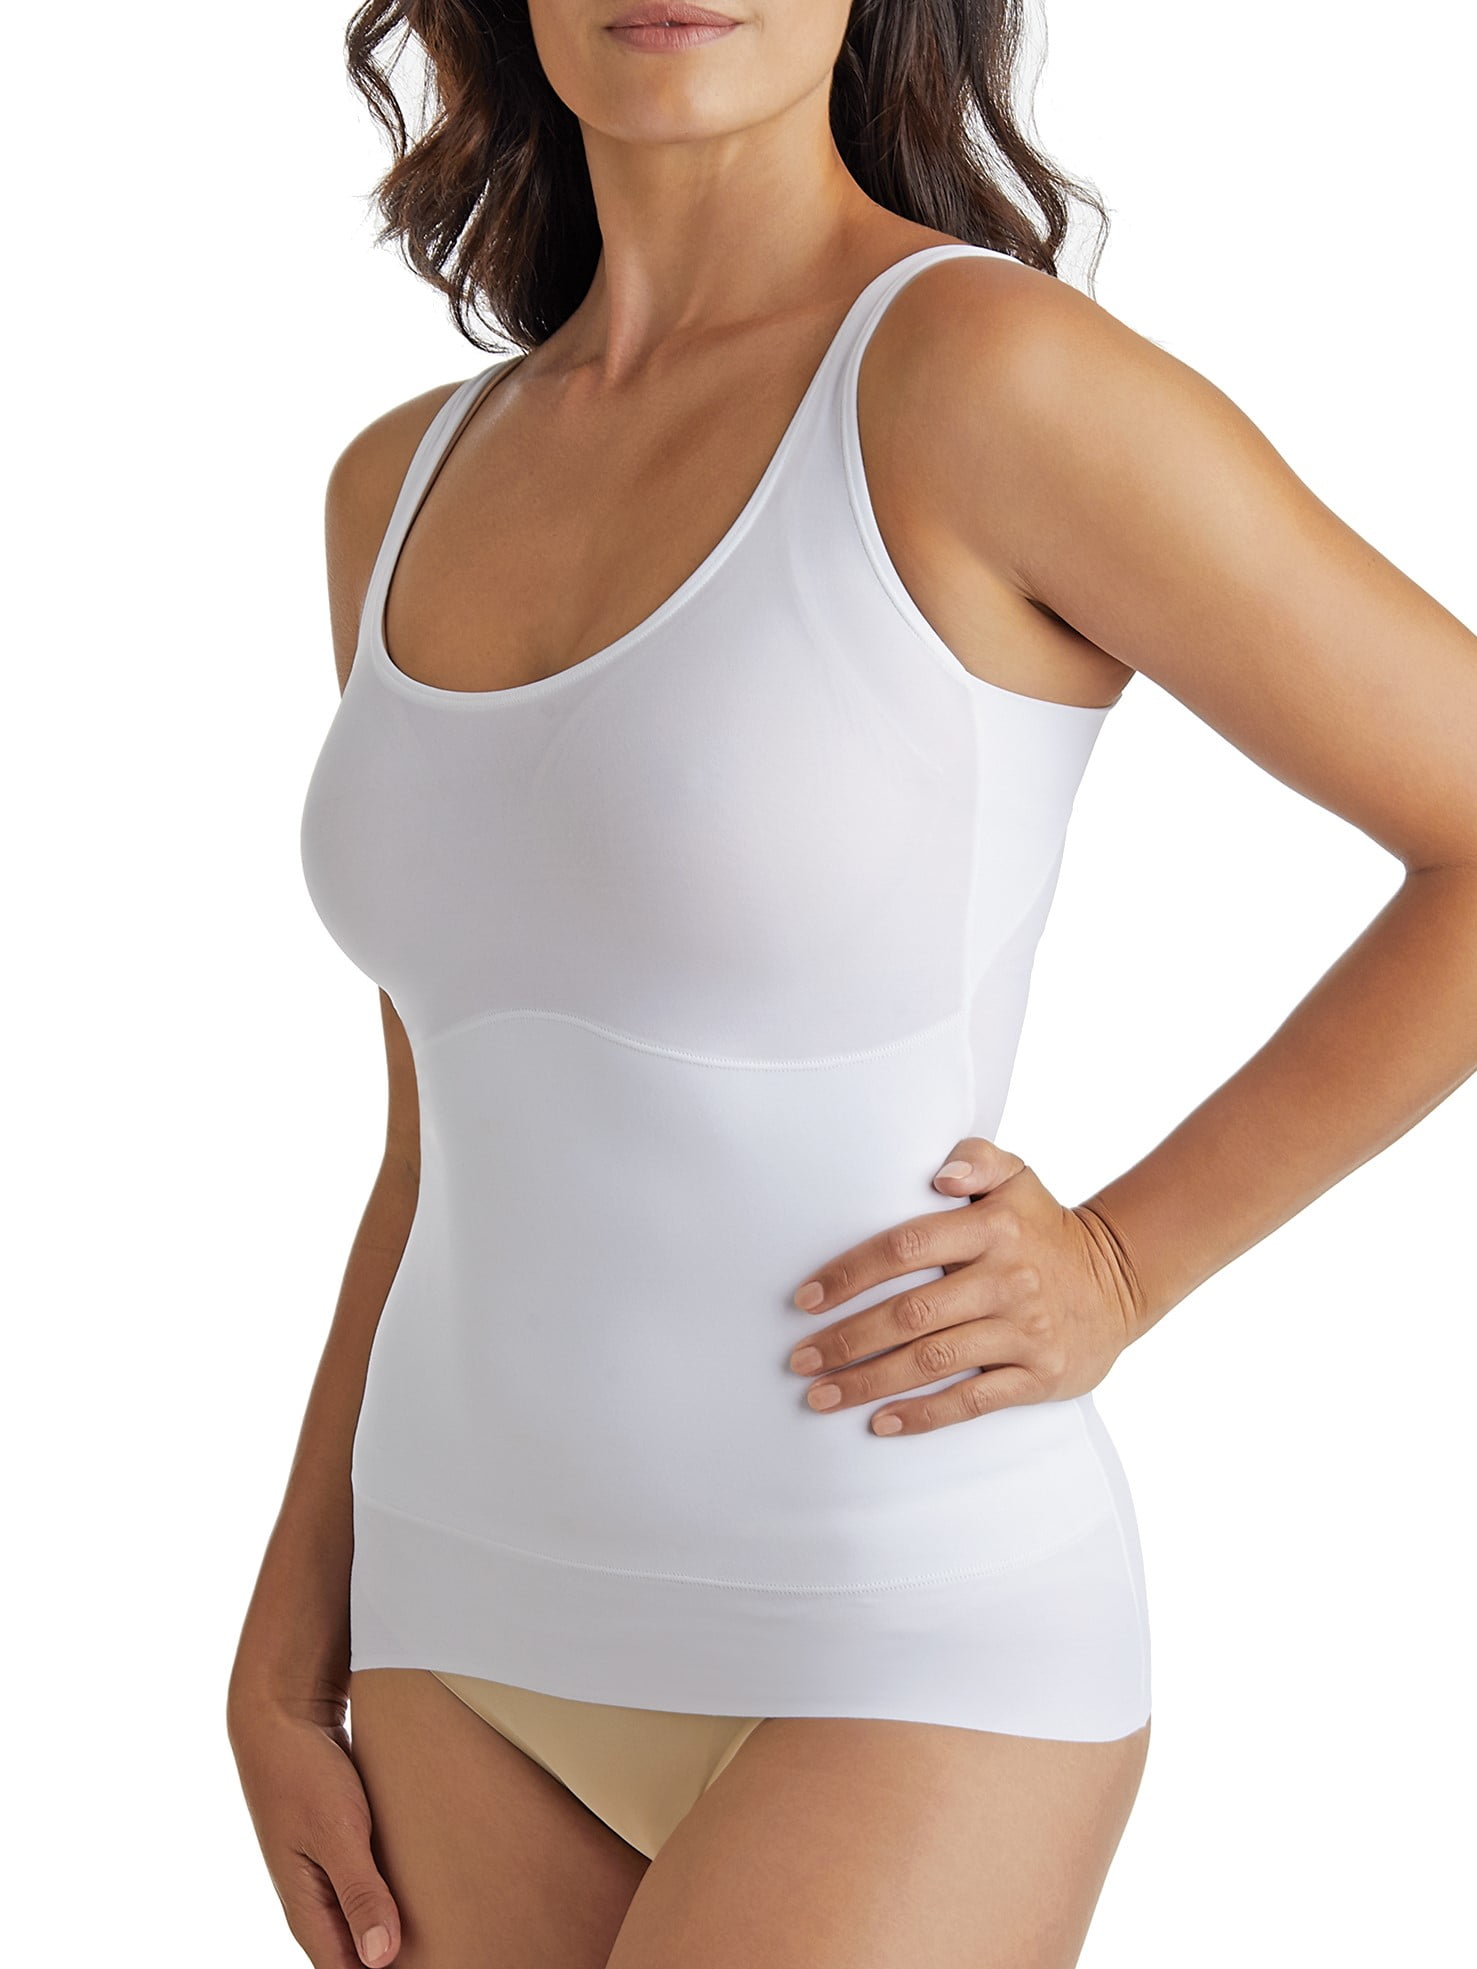 Cupid Women's Firm Control Underarm Smoothing Shaping Camisole Shapewear